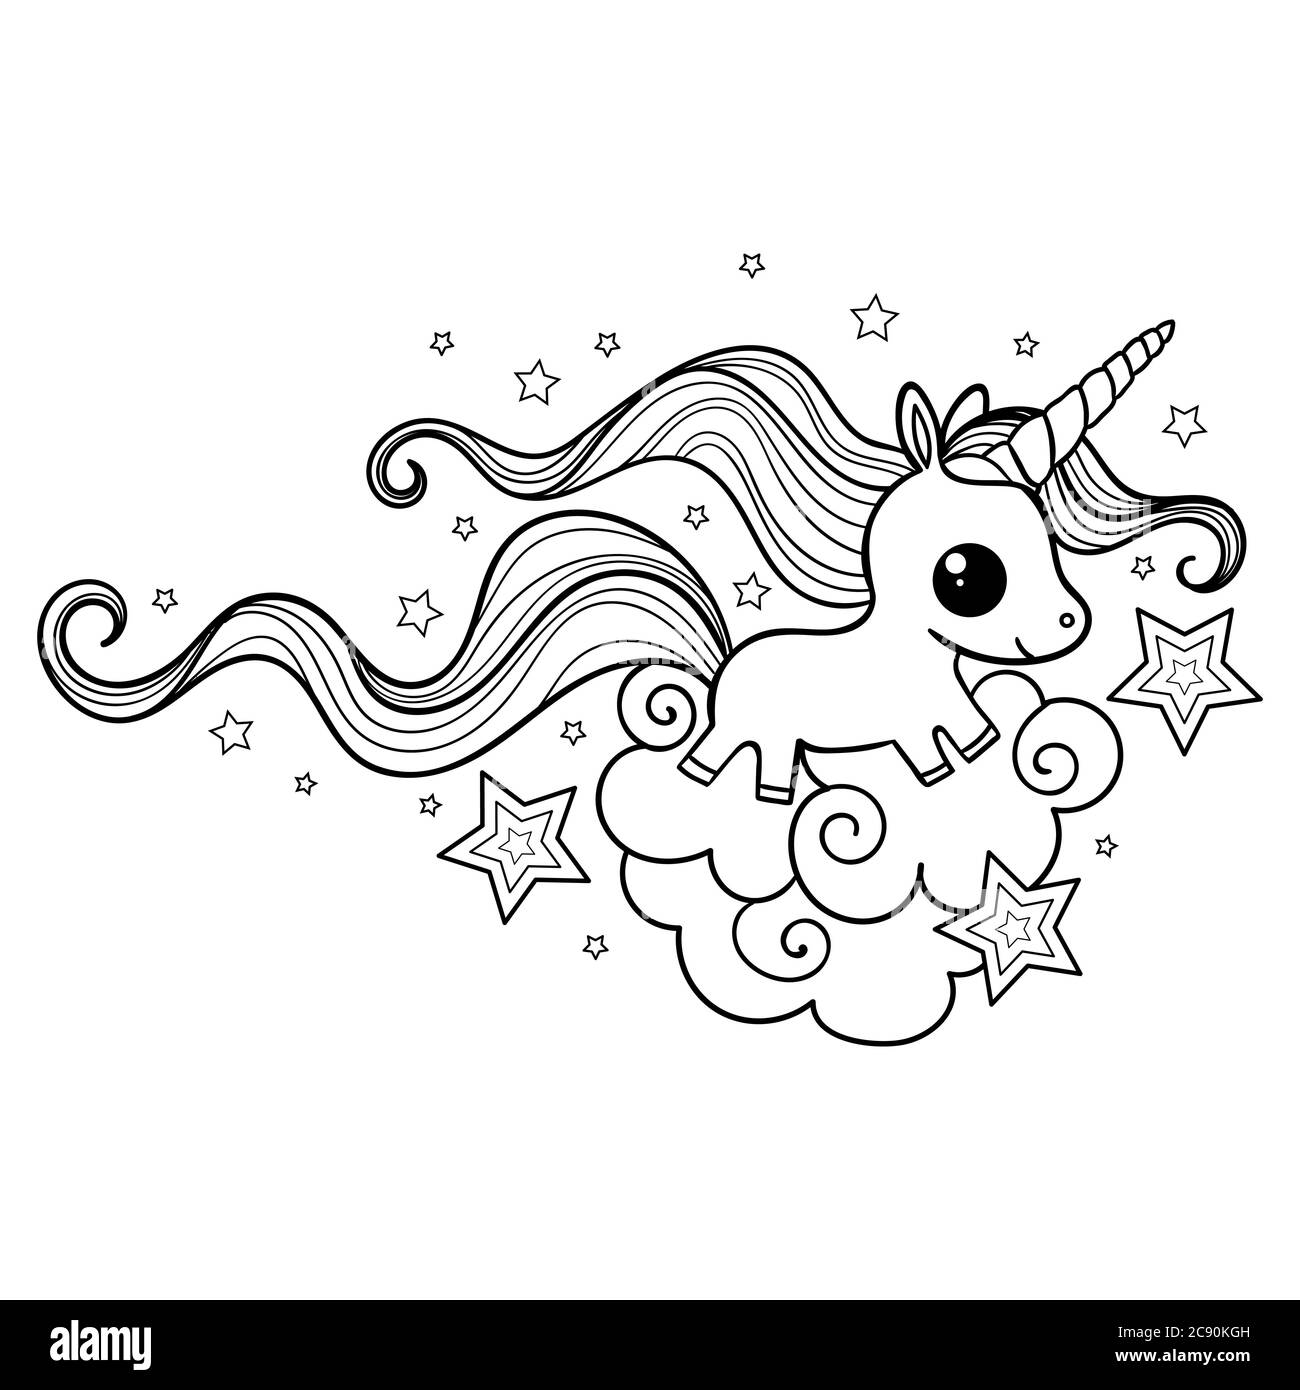 Cartoon, cute unicorn with a long mane. Black and white. Doodle style. Drawn by hand. For prints, posters, coloring books, postcards, etc. Vector Stock Vector